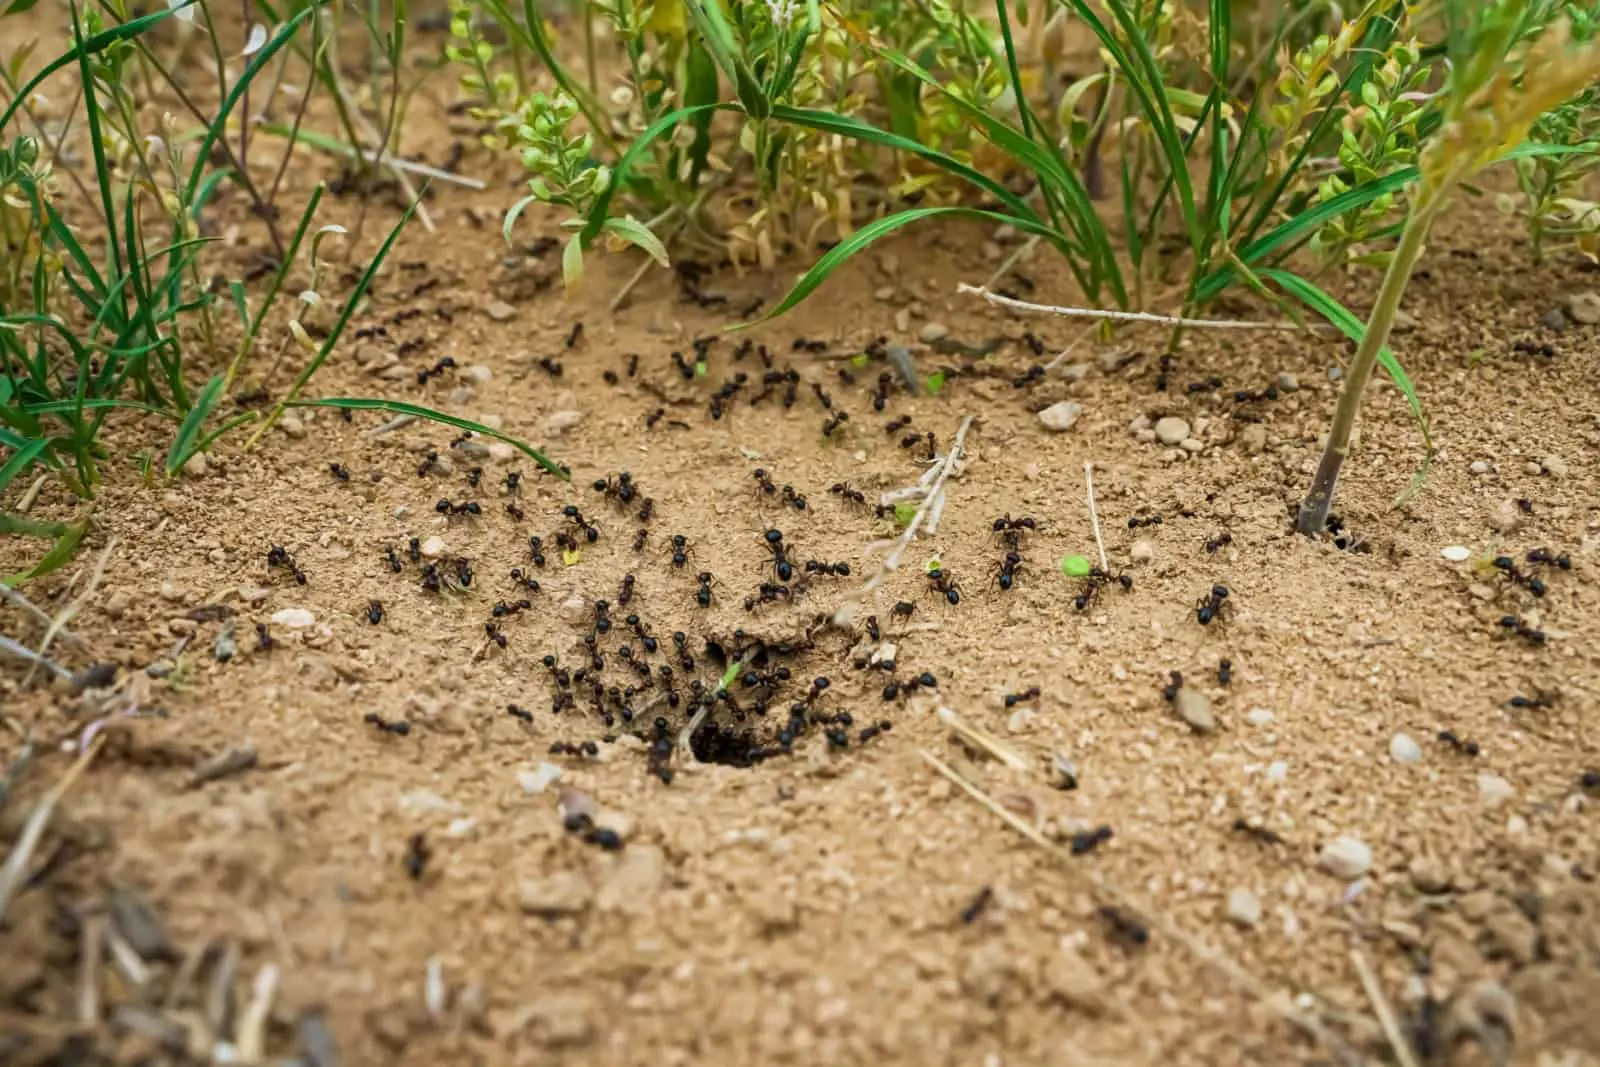 Ants with prey at the entrance to the termite mound.